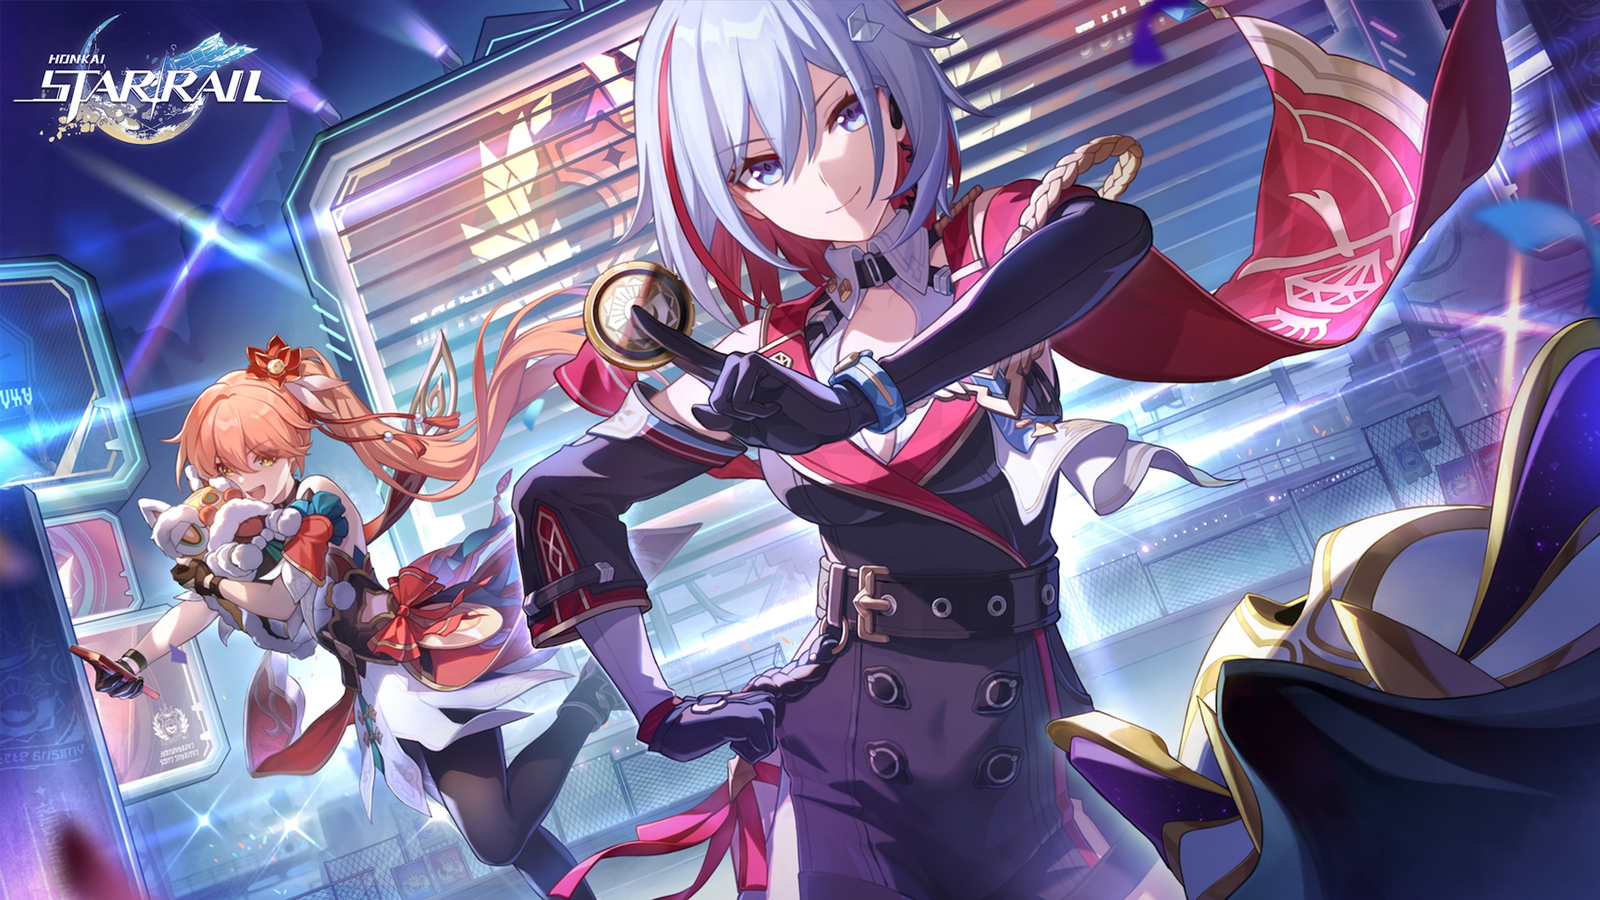 Honkai Star Rail 1.4 Banner and event details